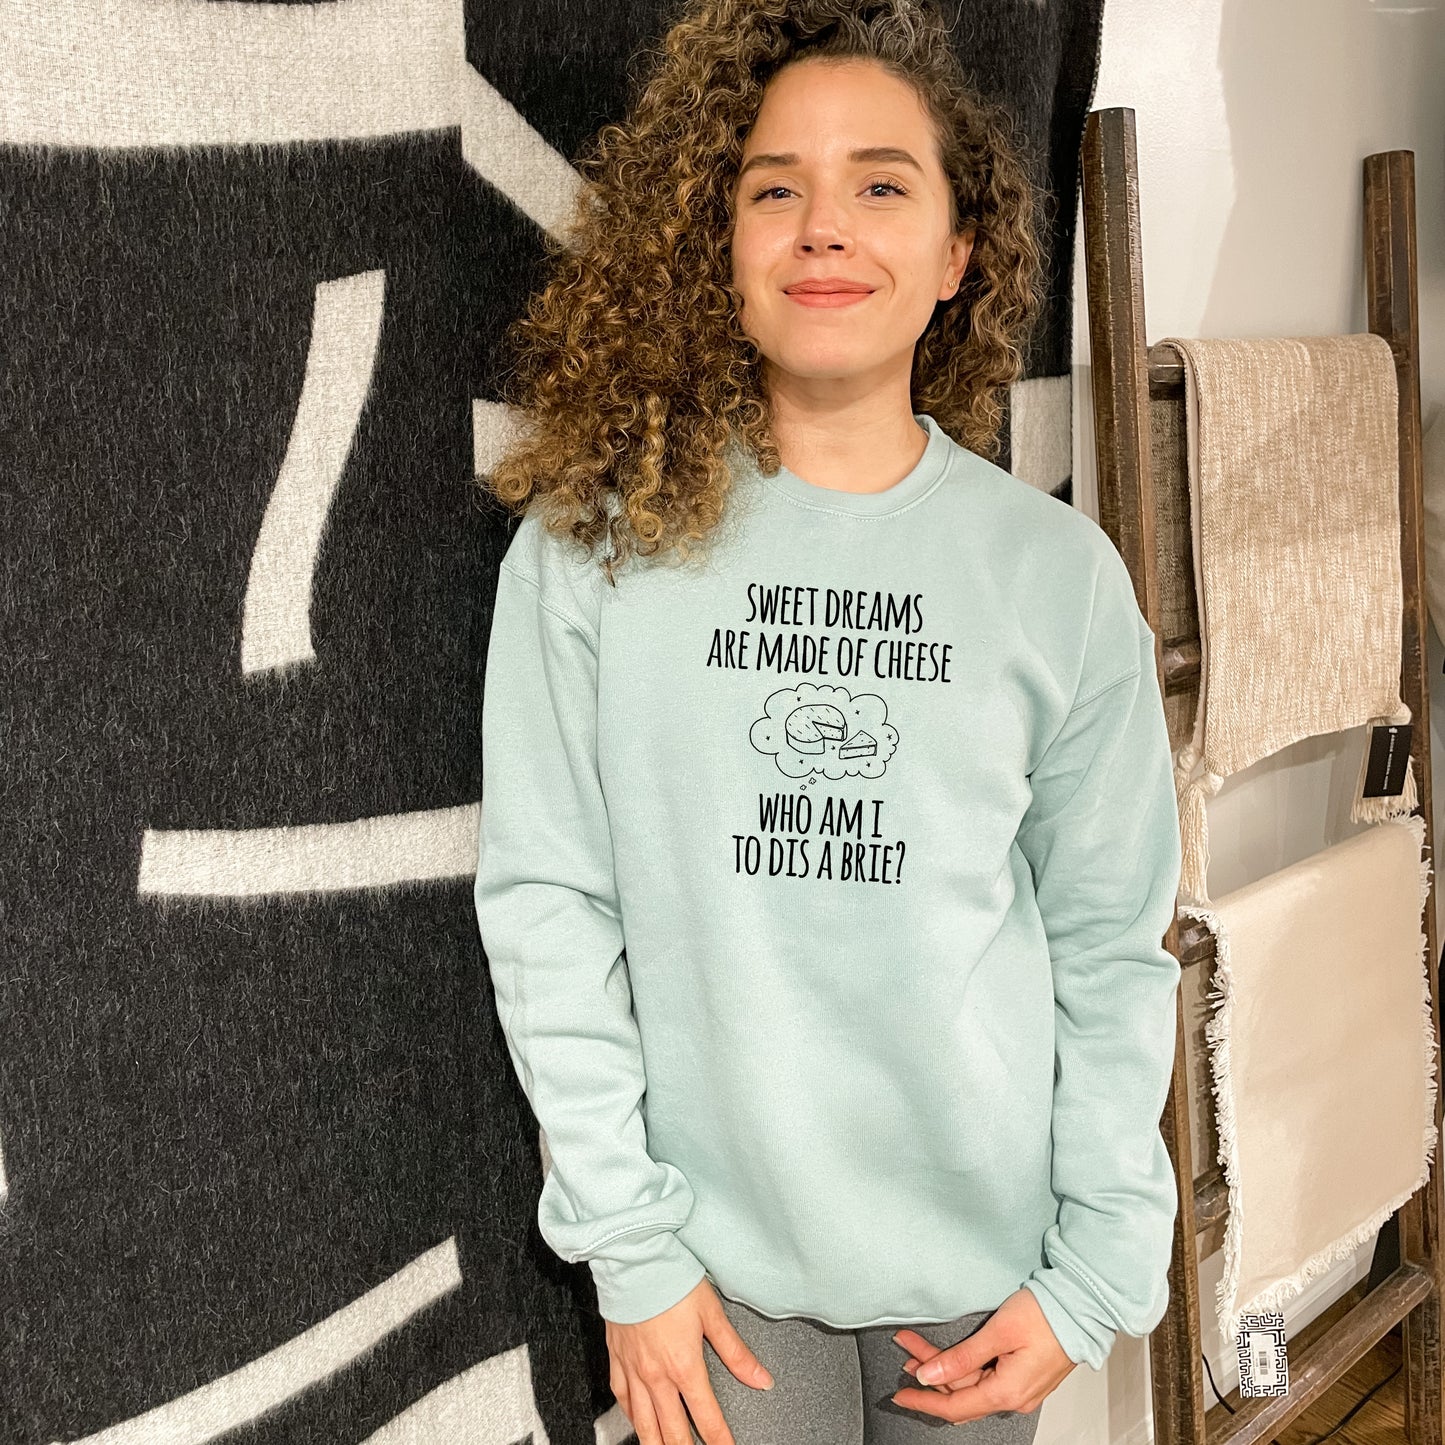 Sweet Dreams Are Made Of Cheese, Who Am I To Dis A Brie? - Unisex Sweatshirt - Heather Gray or Dusty Blue